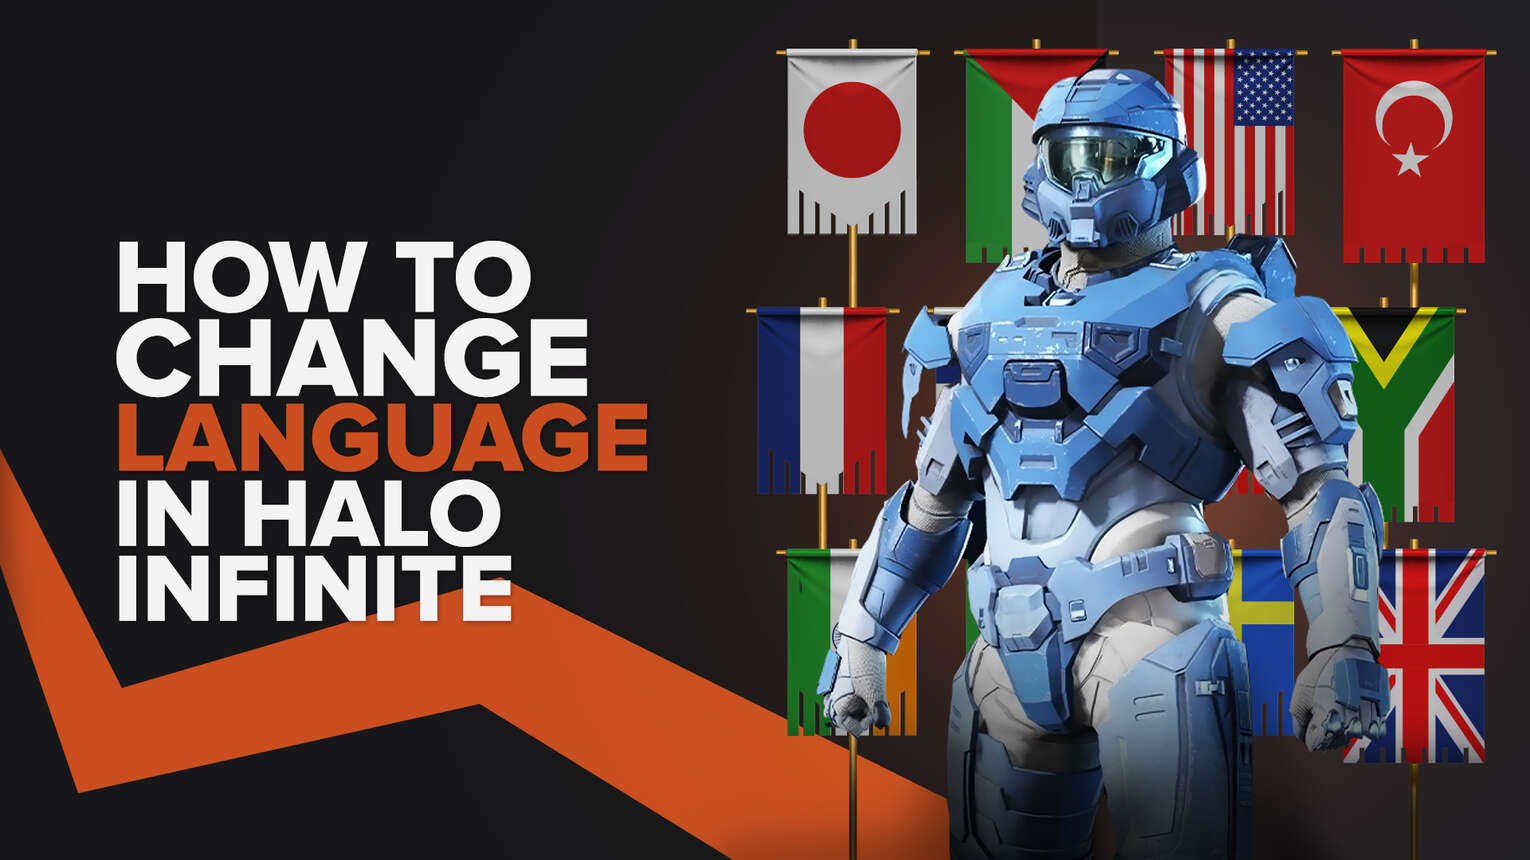 How To Change Language in Halo Infinite Quickly